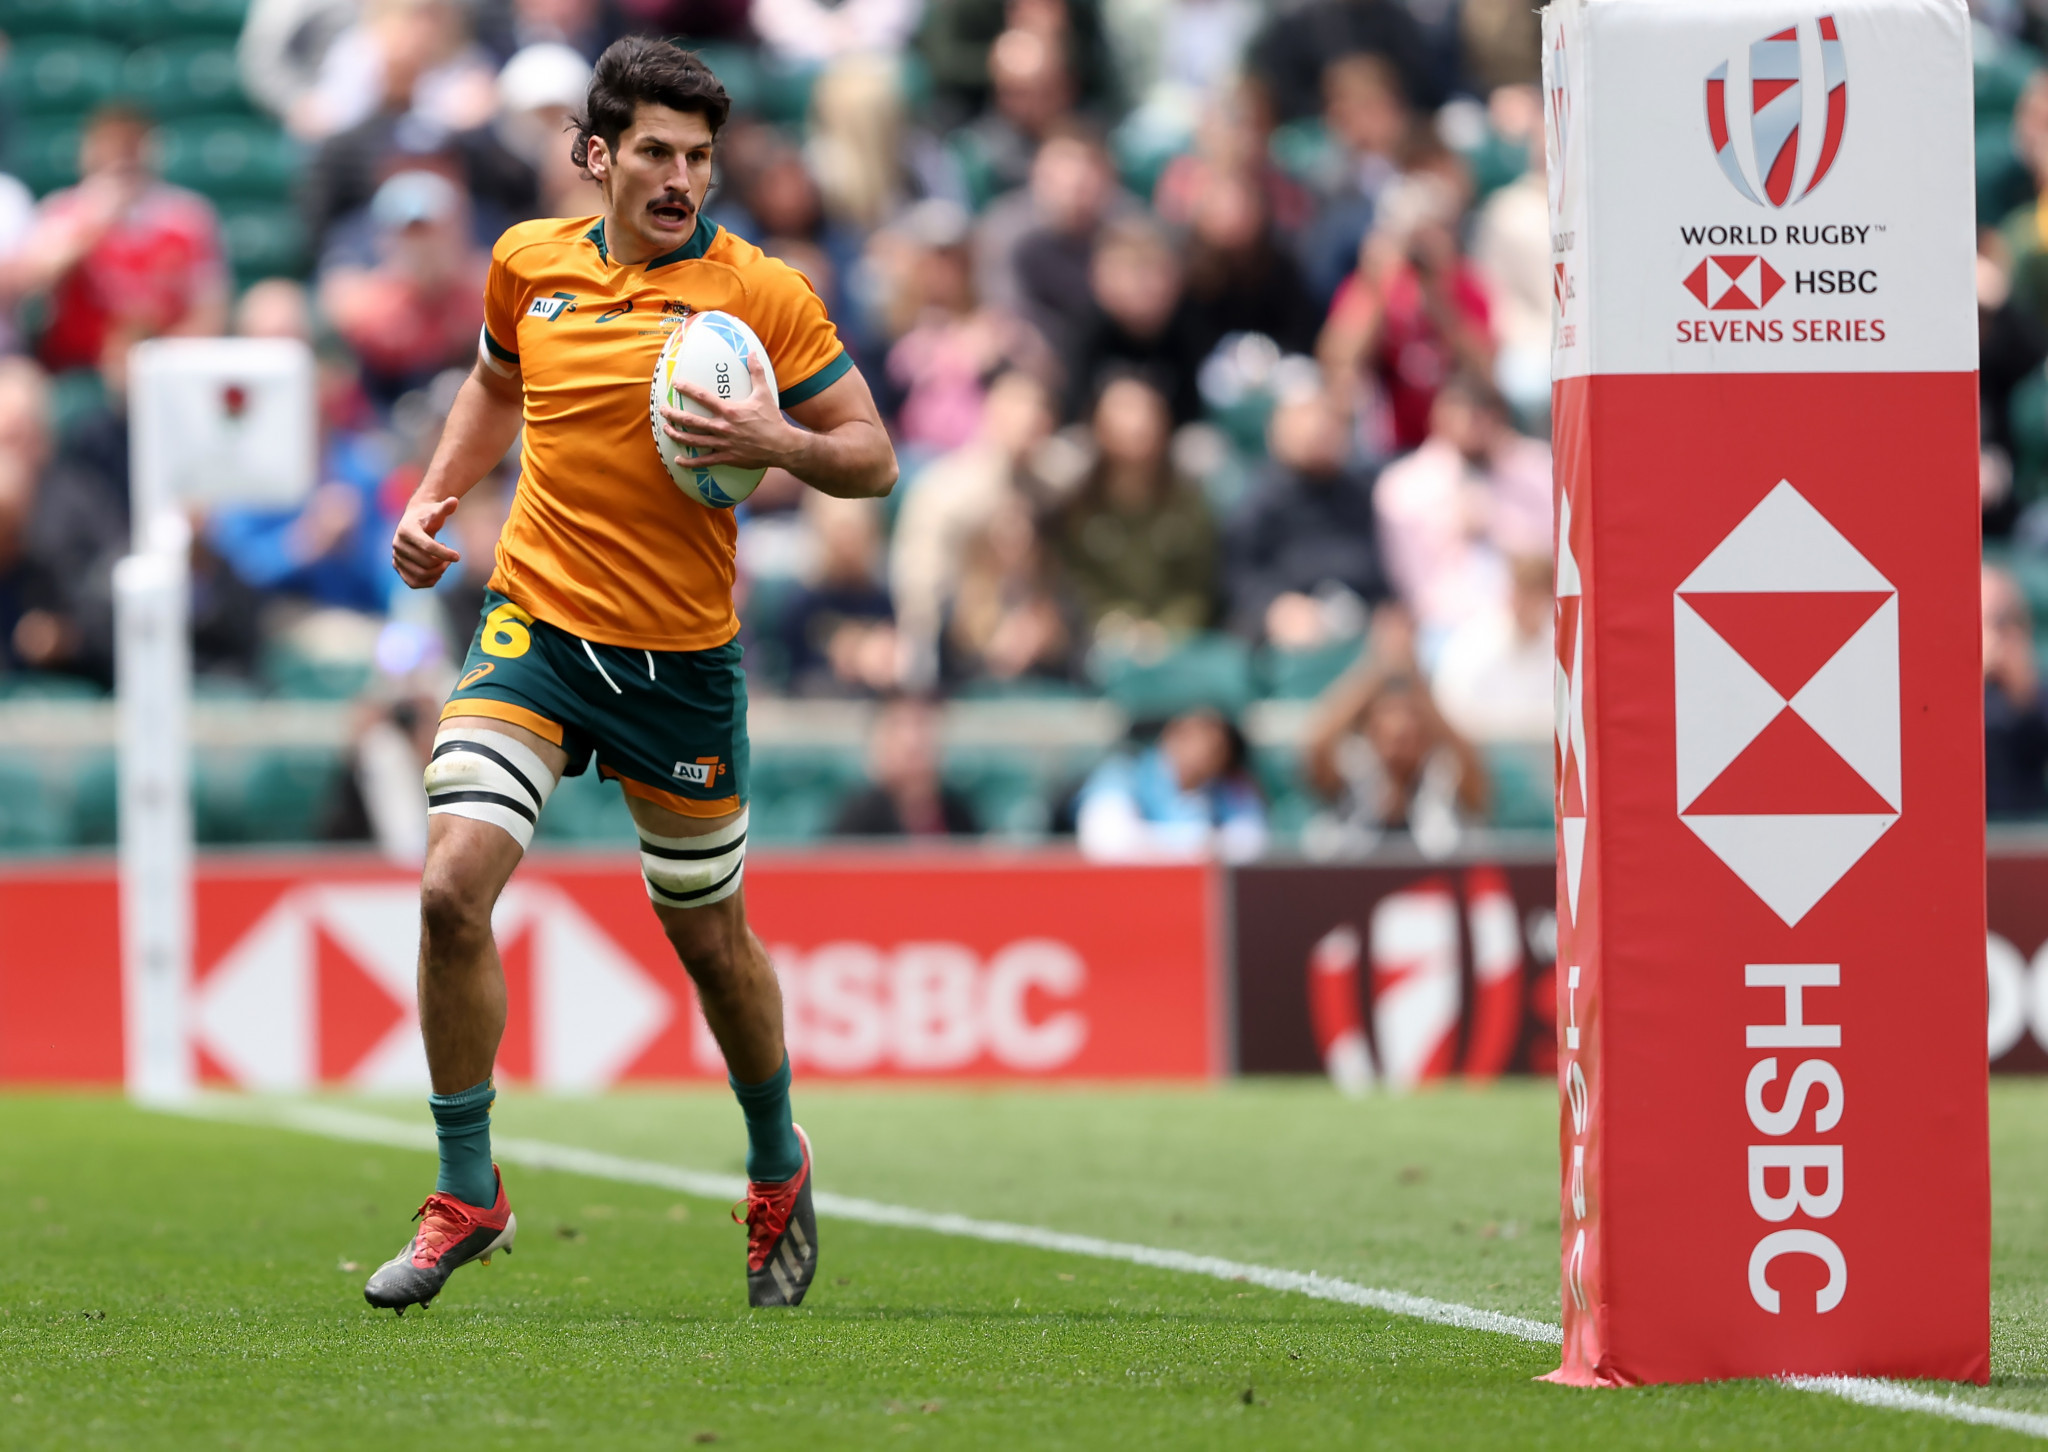 Men's World Rugby Sevens Series reduced in size and calendar refreshed